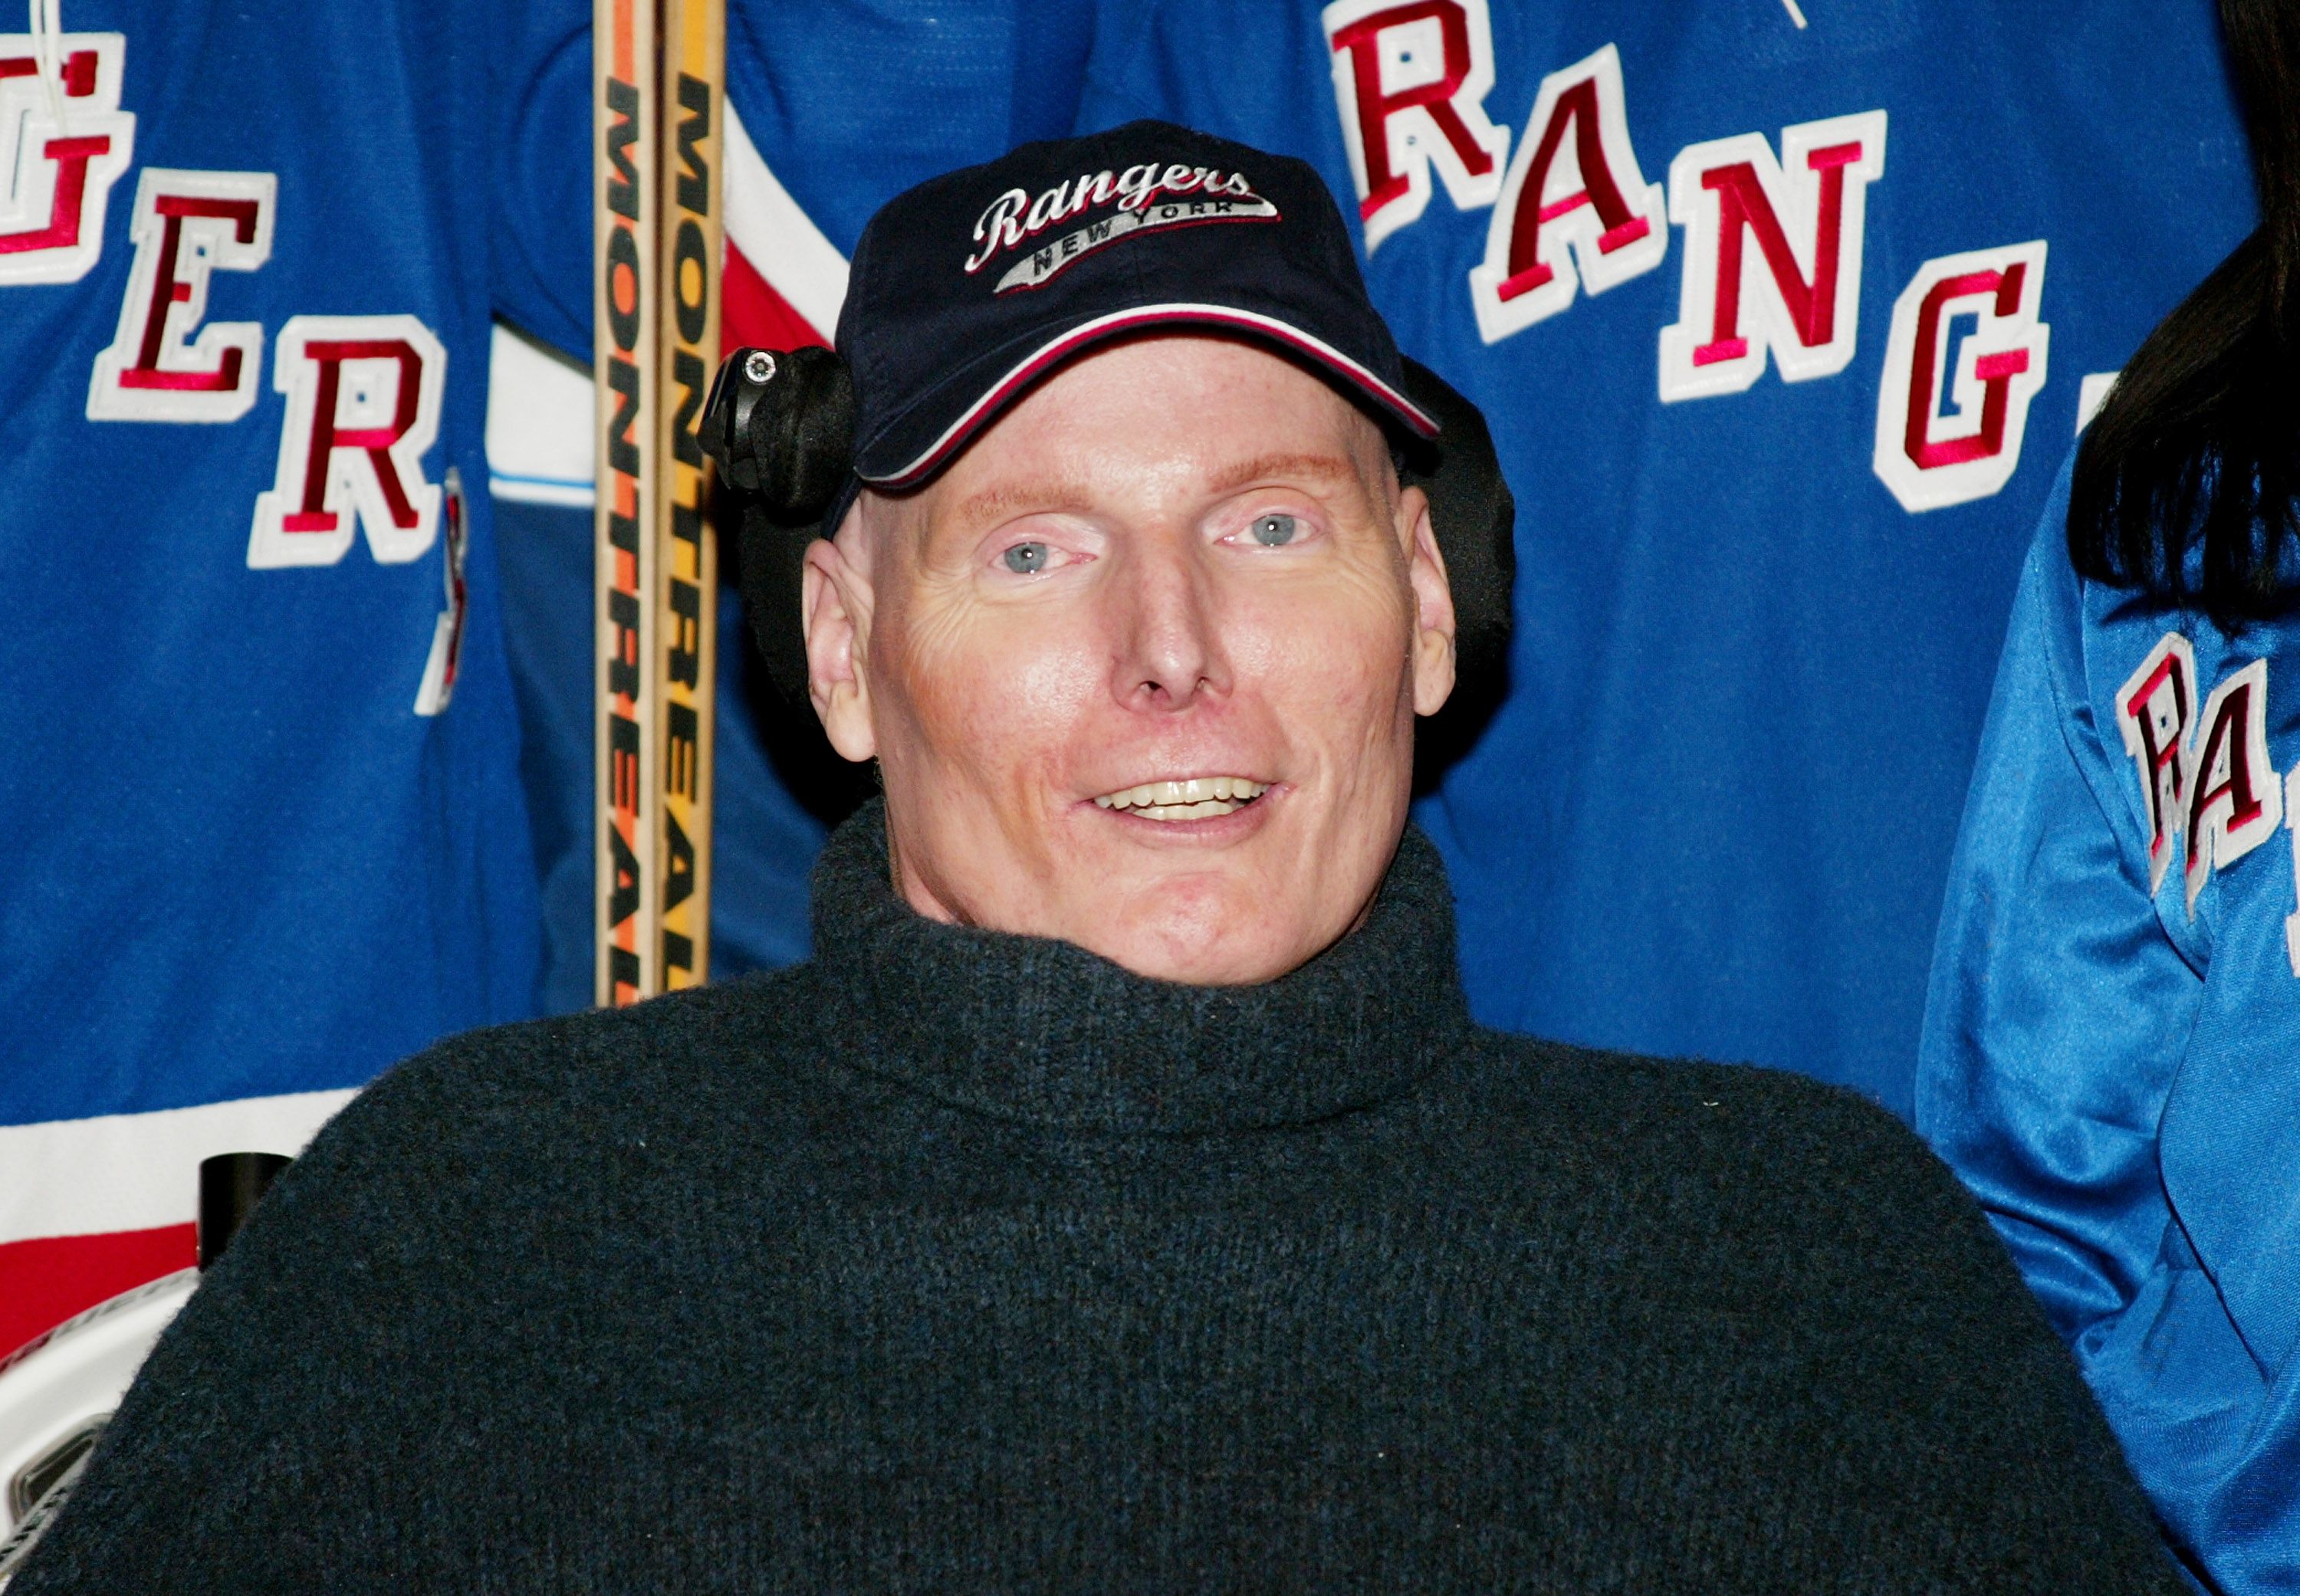 Christopher Reeve at the SuperSkate VI charity hockey event at Madison Square Garden on January 25, 2004, in New York City | Photo: Evan Agostini/Getty Images